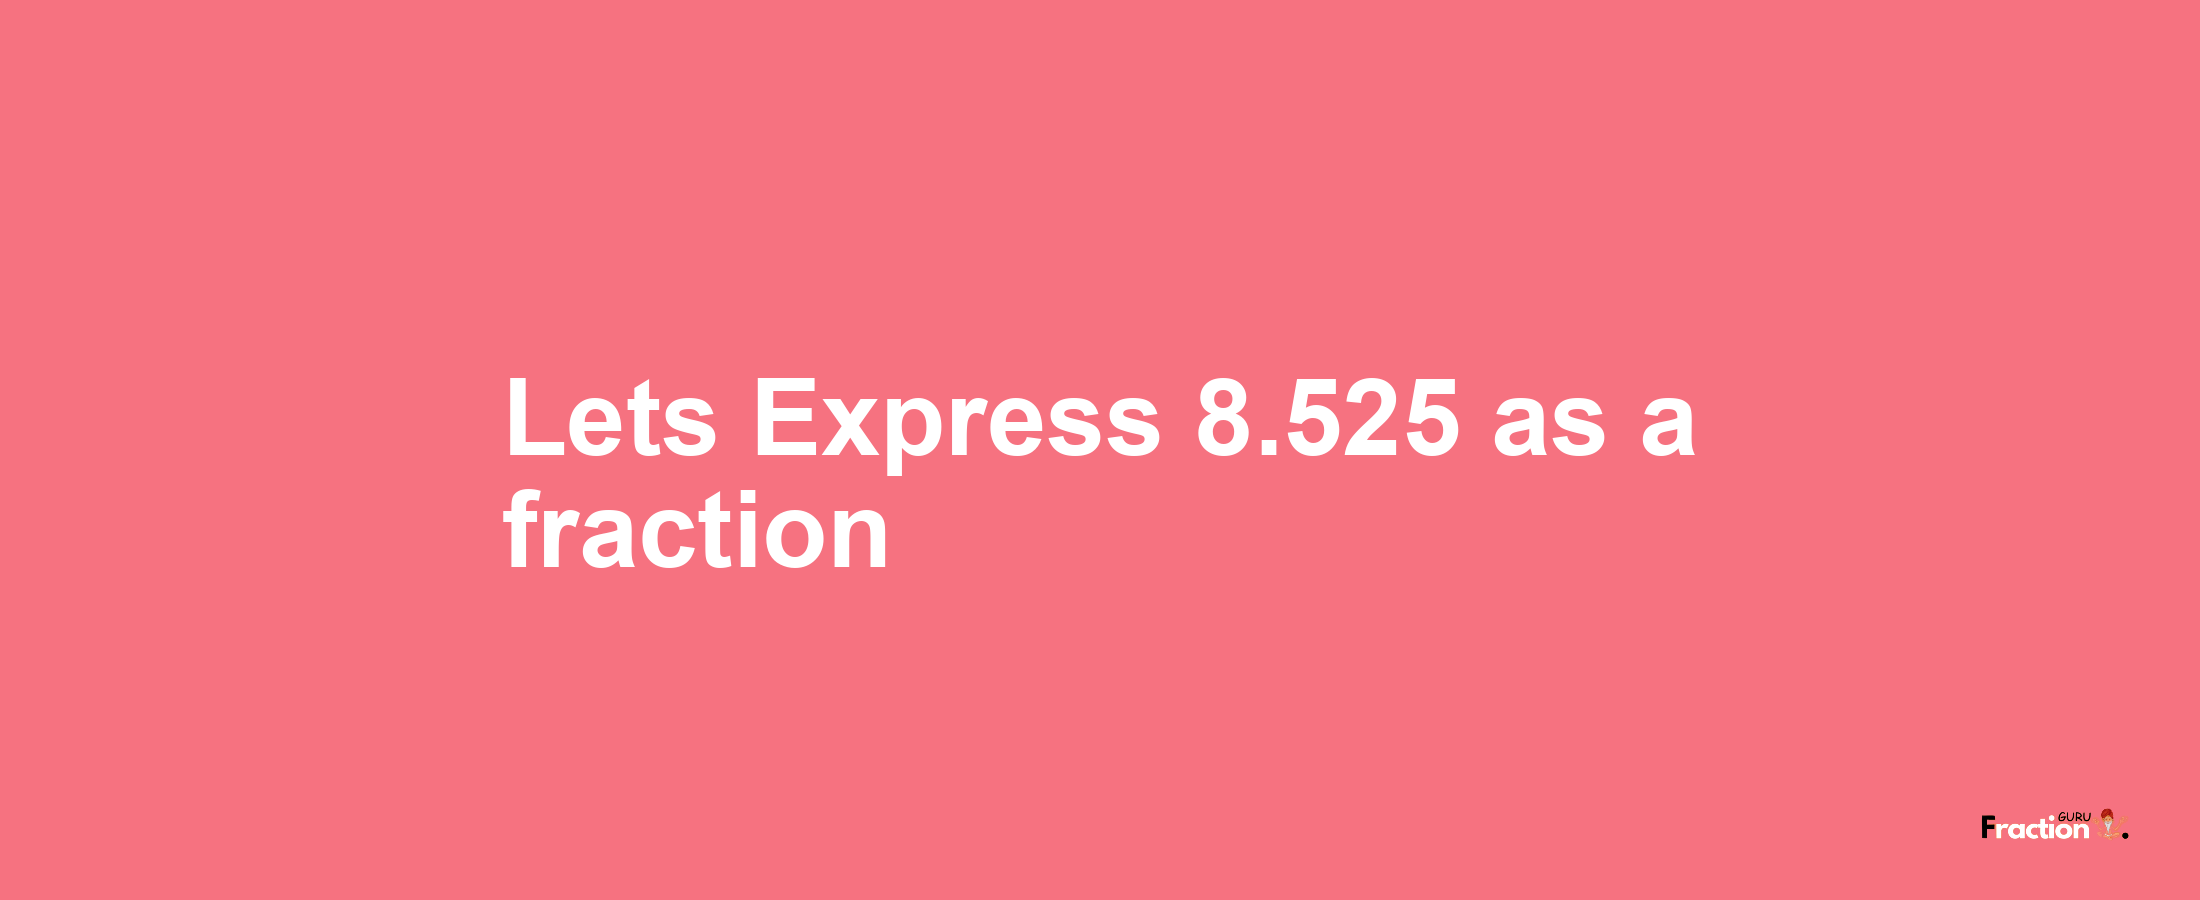 Lets Express 8.525 as afraction